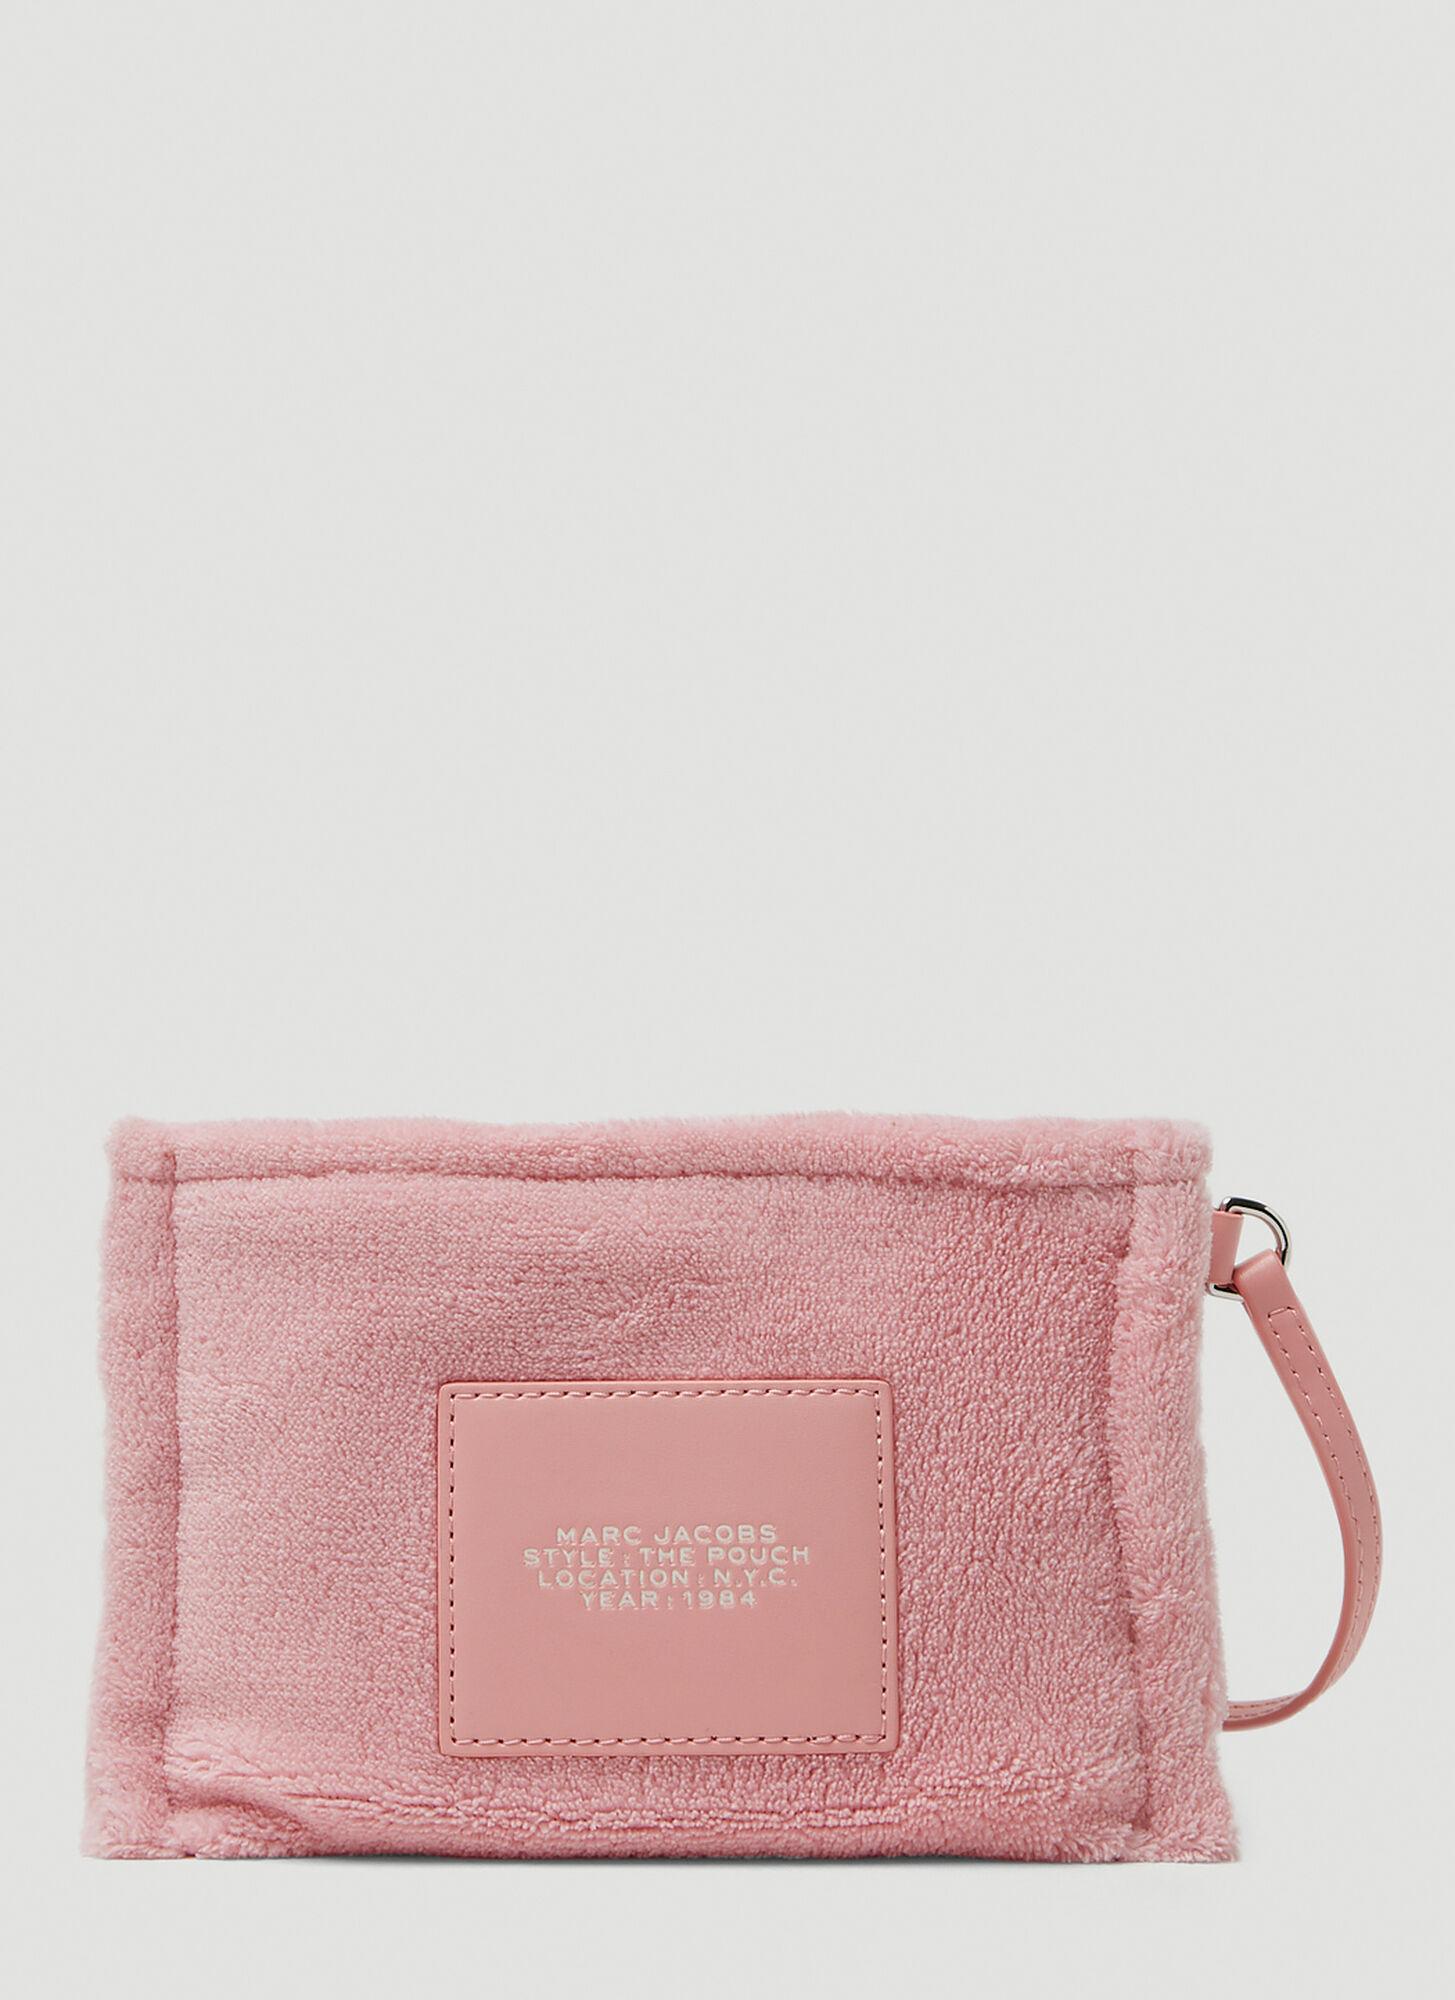 Marc Jacobs The Pouch Clutch Bag in Pink | Lyst